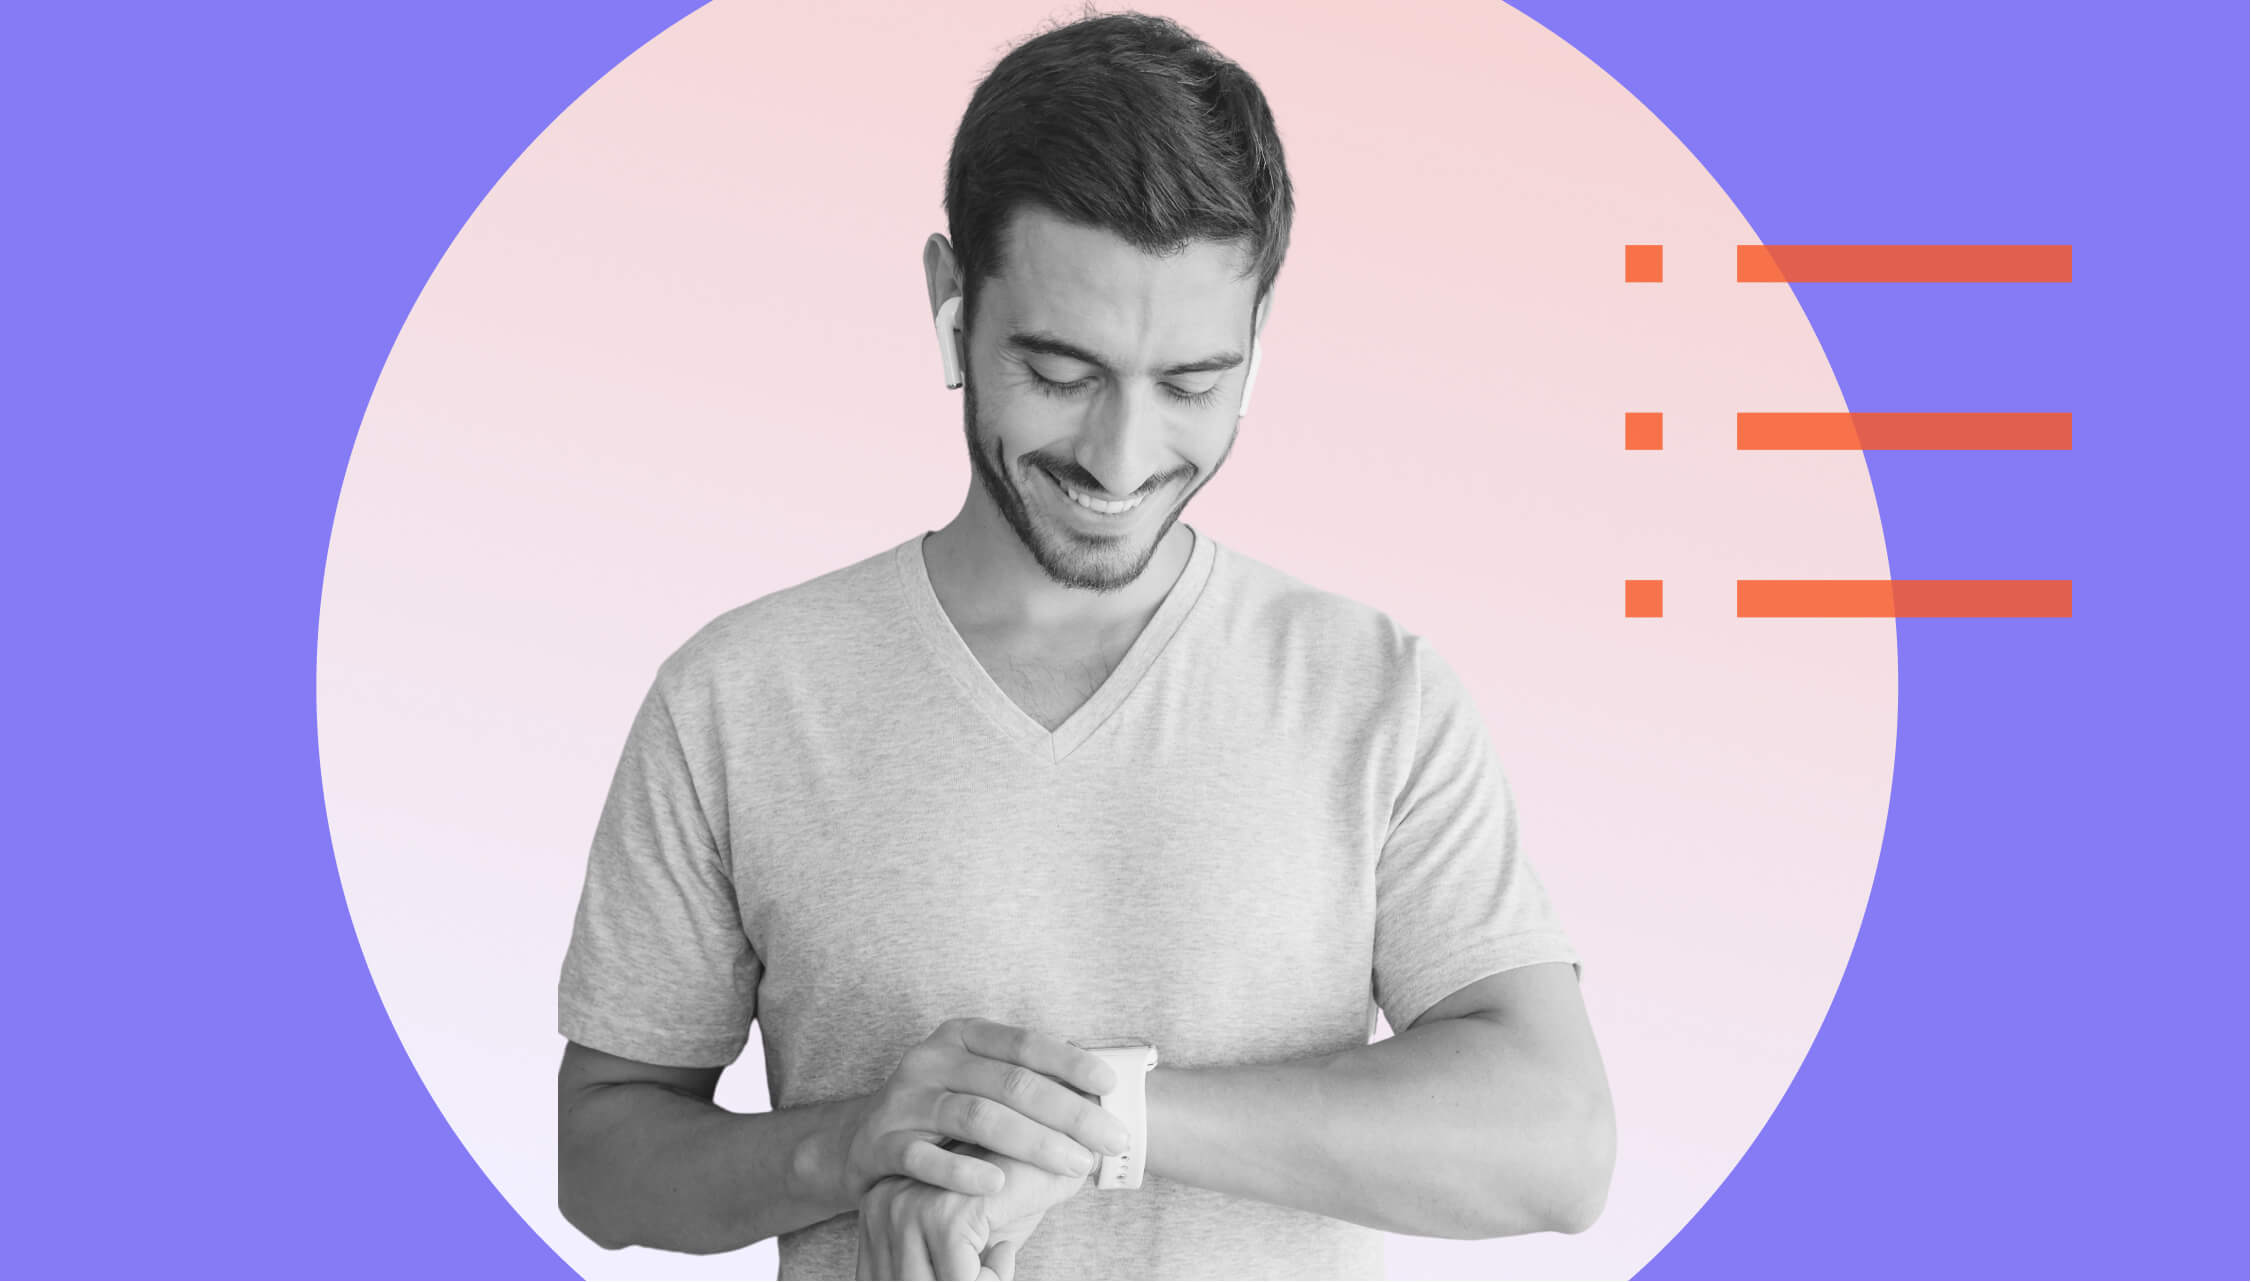 Man with headphones in ear looks at his smartwatch and laughs, background is purple.